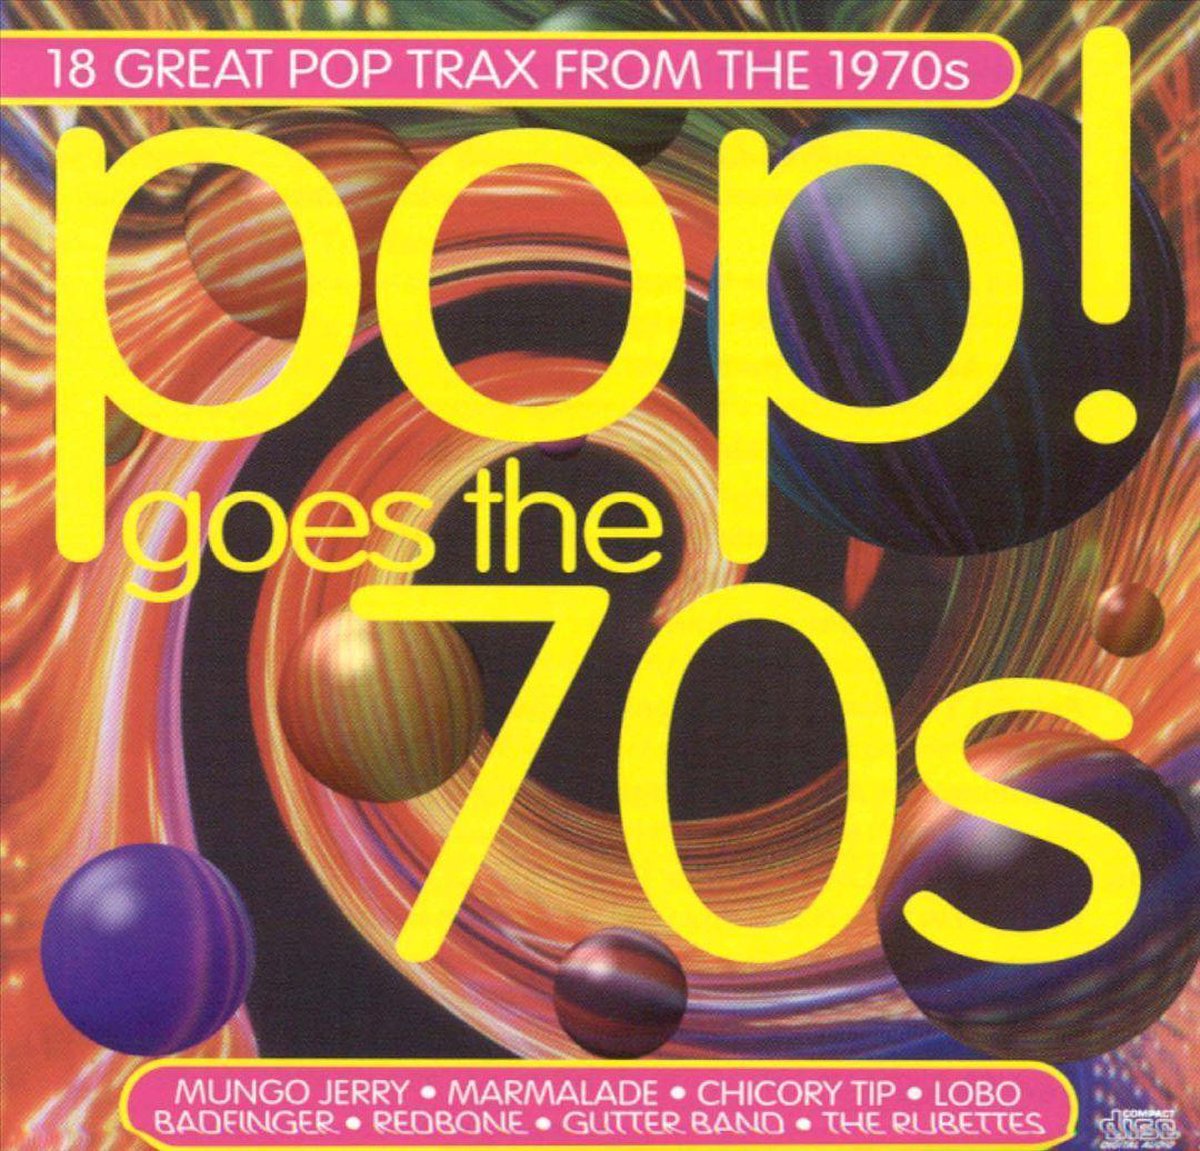 Pop Goes the 70's [K-Tel] - various artists